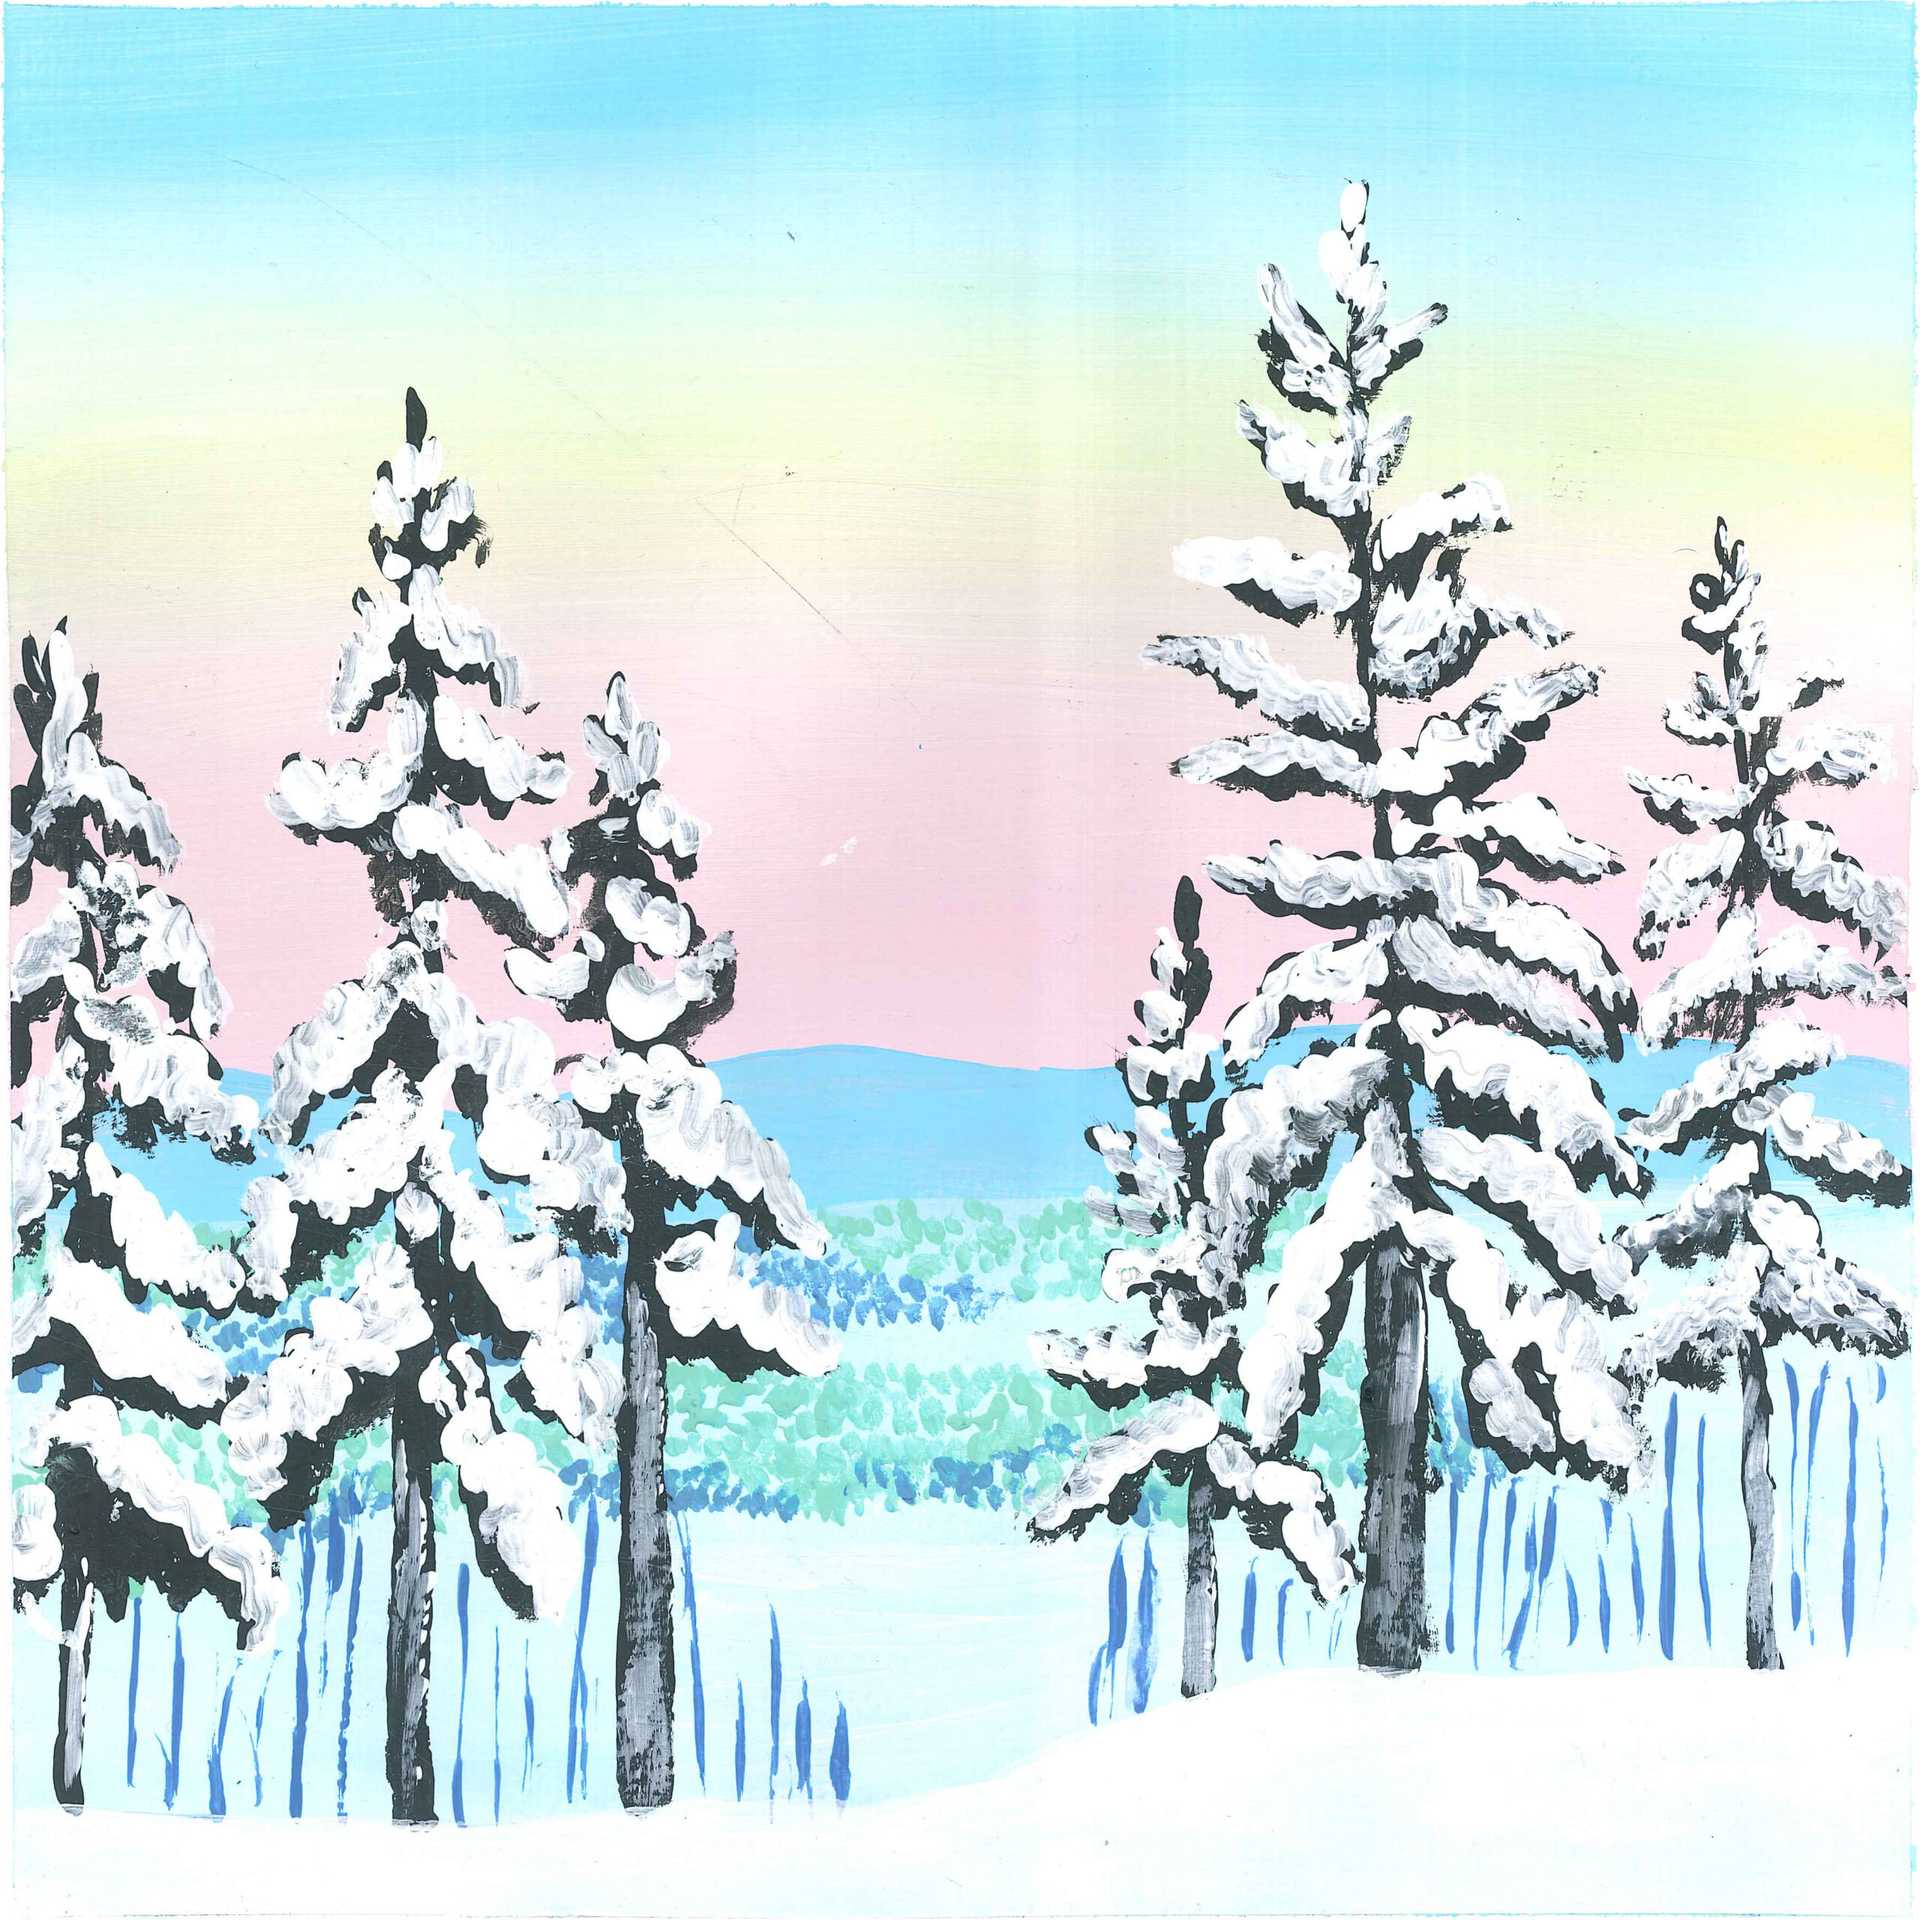 Falling Snow in the Forest - nature soundscape - earth.fm